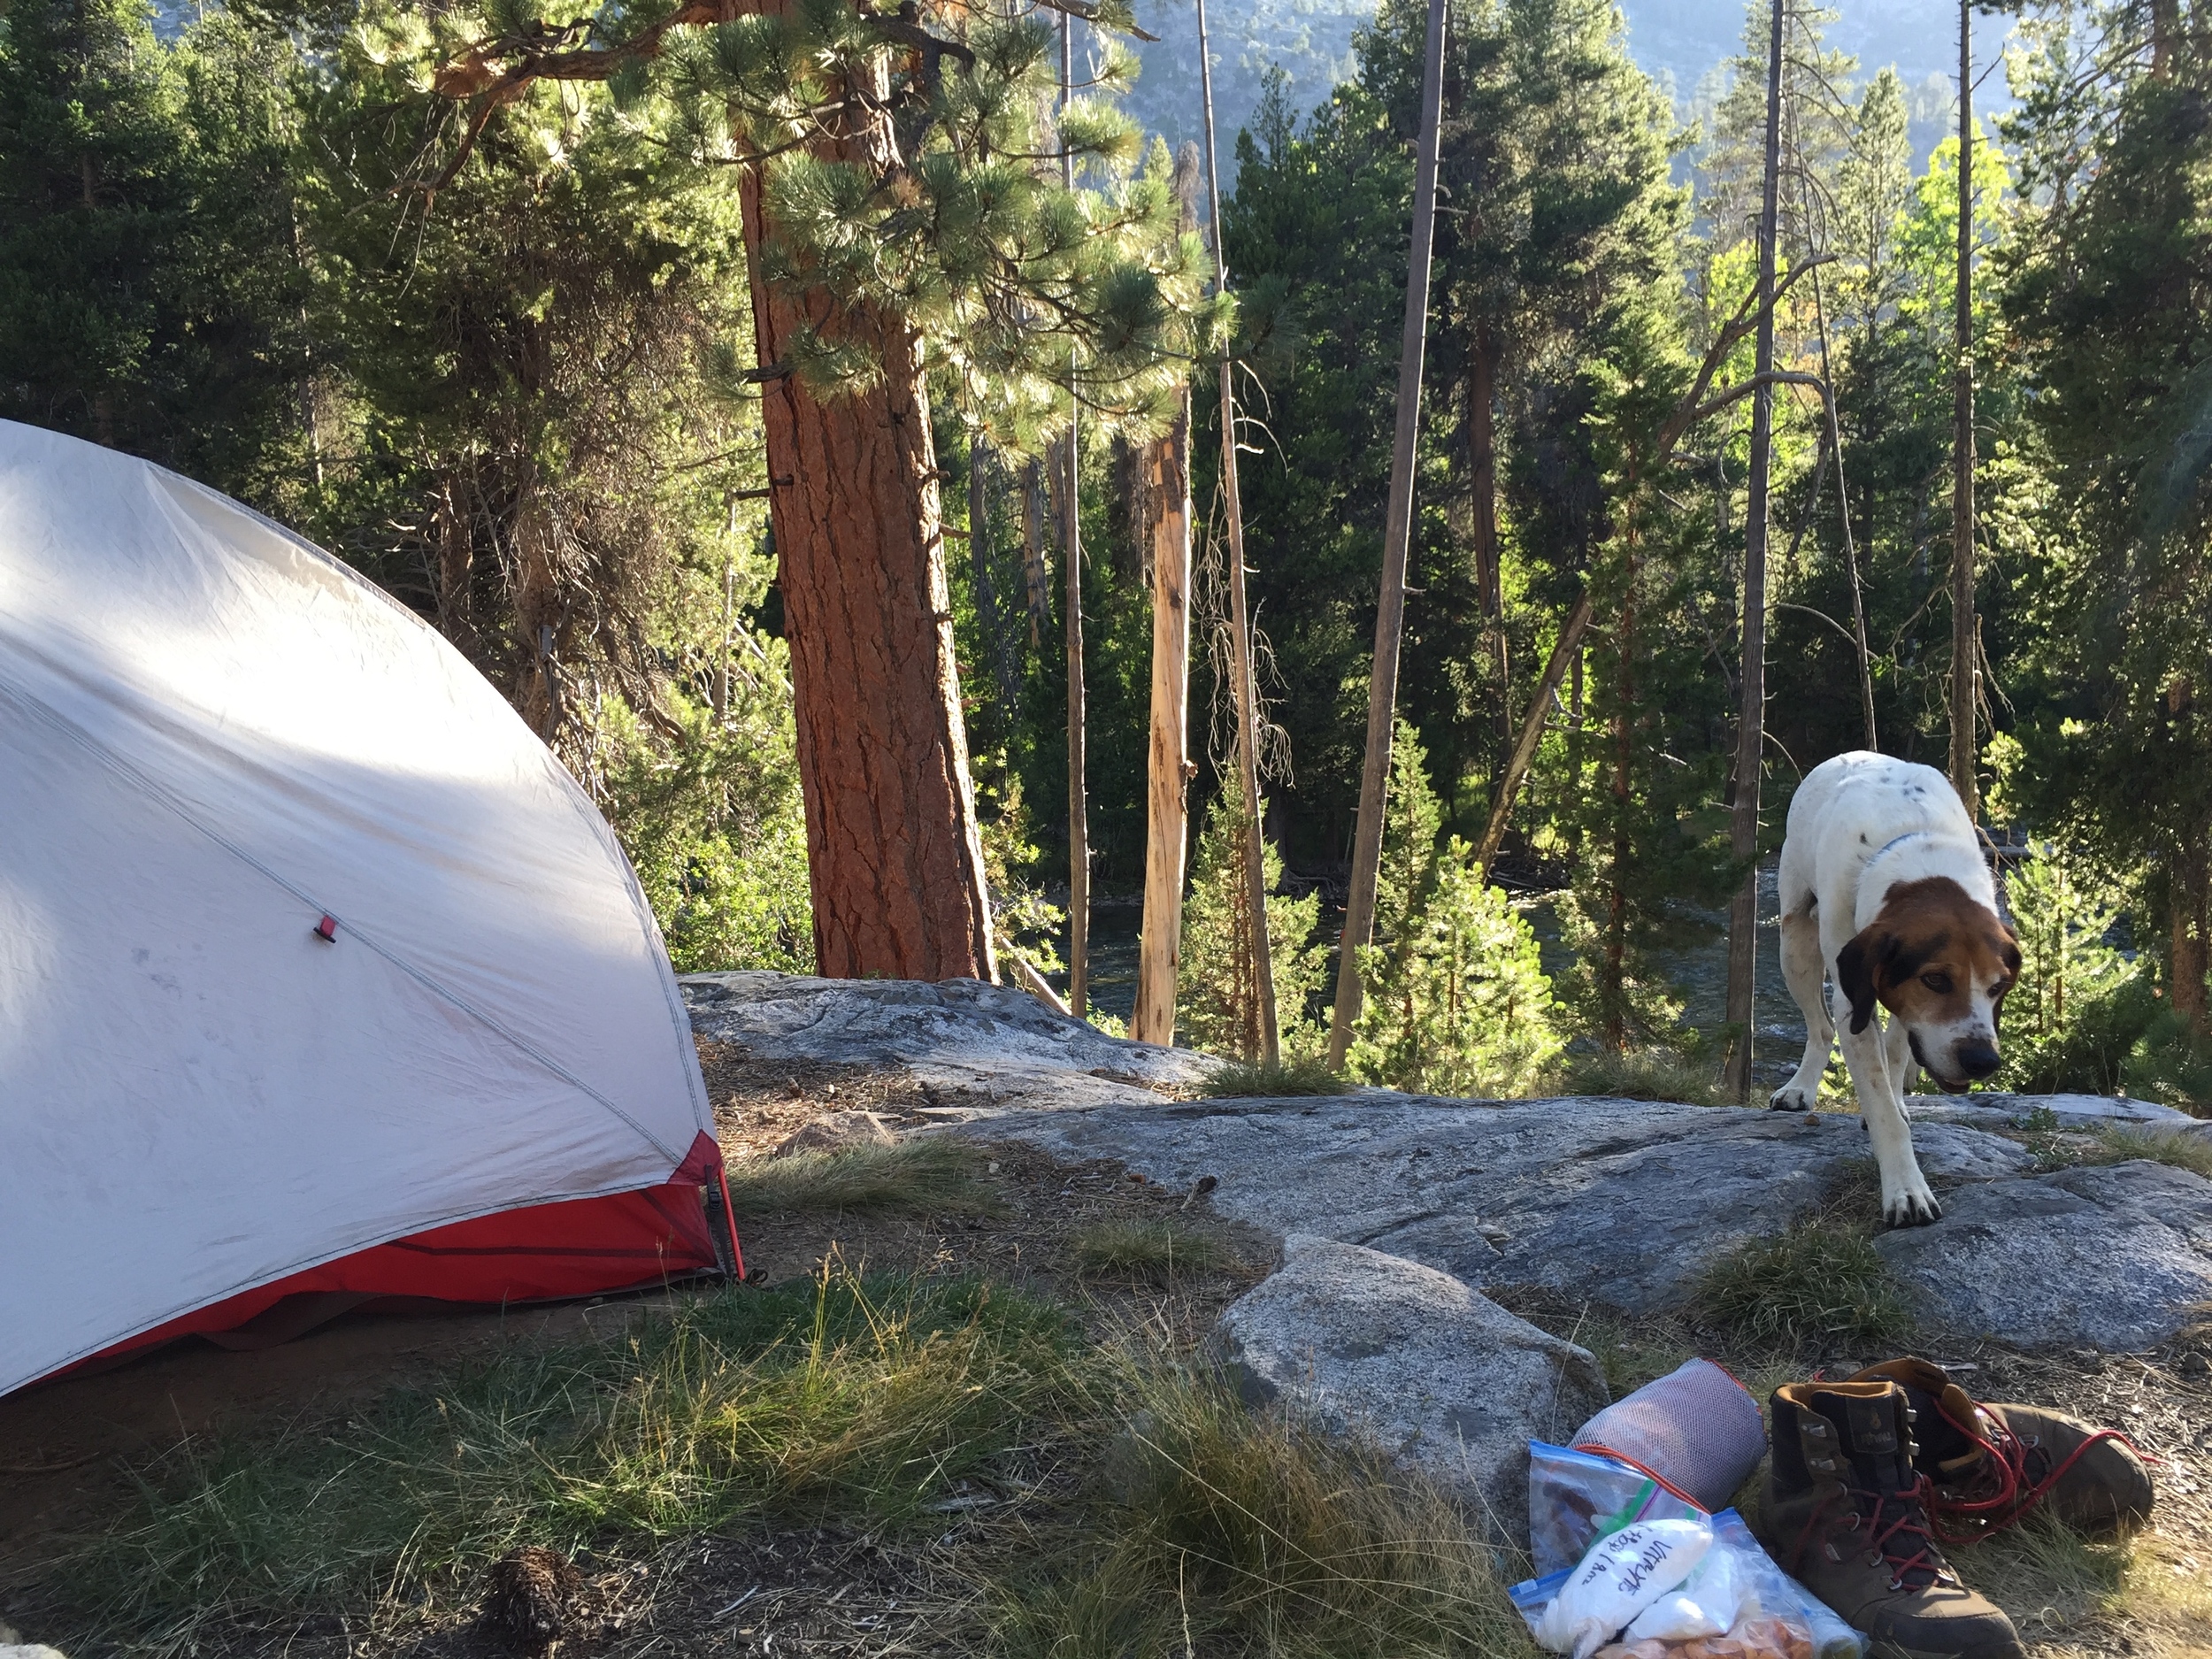  Day 8: camped near Muir Trail Ranch, just above the San Joaquin River. we were visited by one of the resident dogs of MTR. We found the dogs to be much friendlier than the staff. 